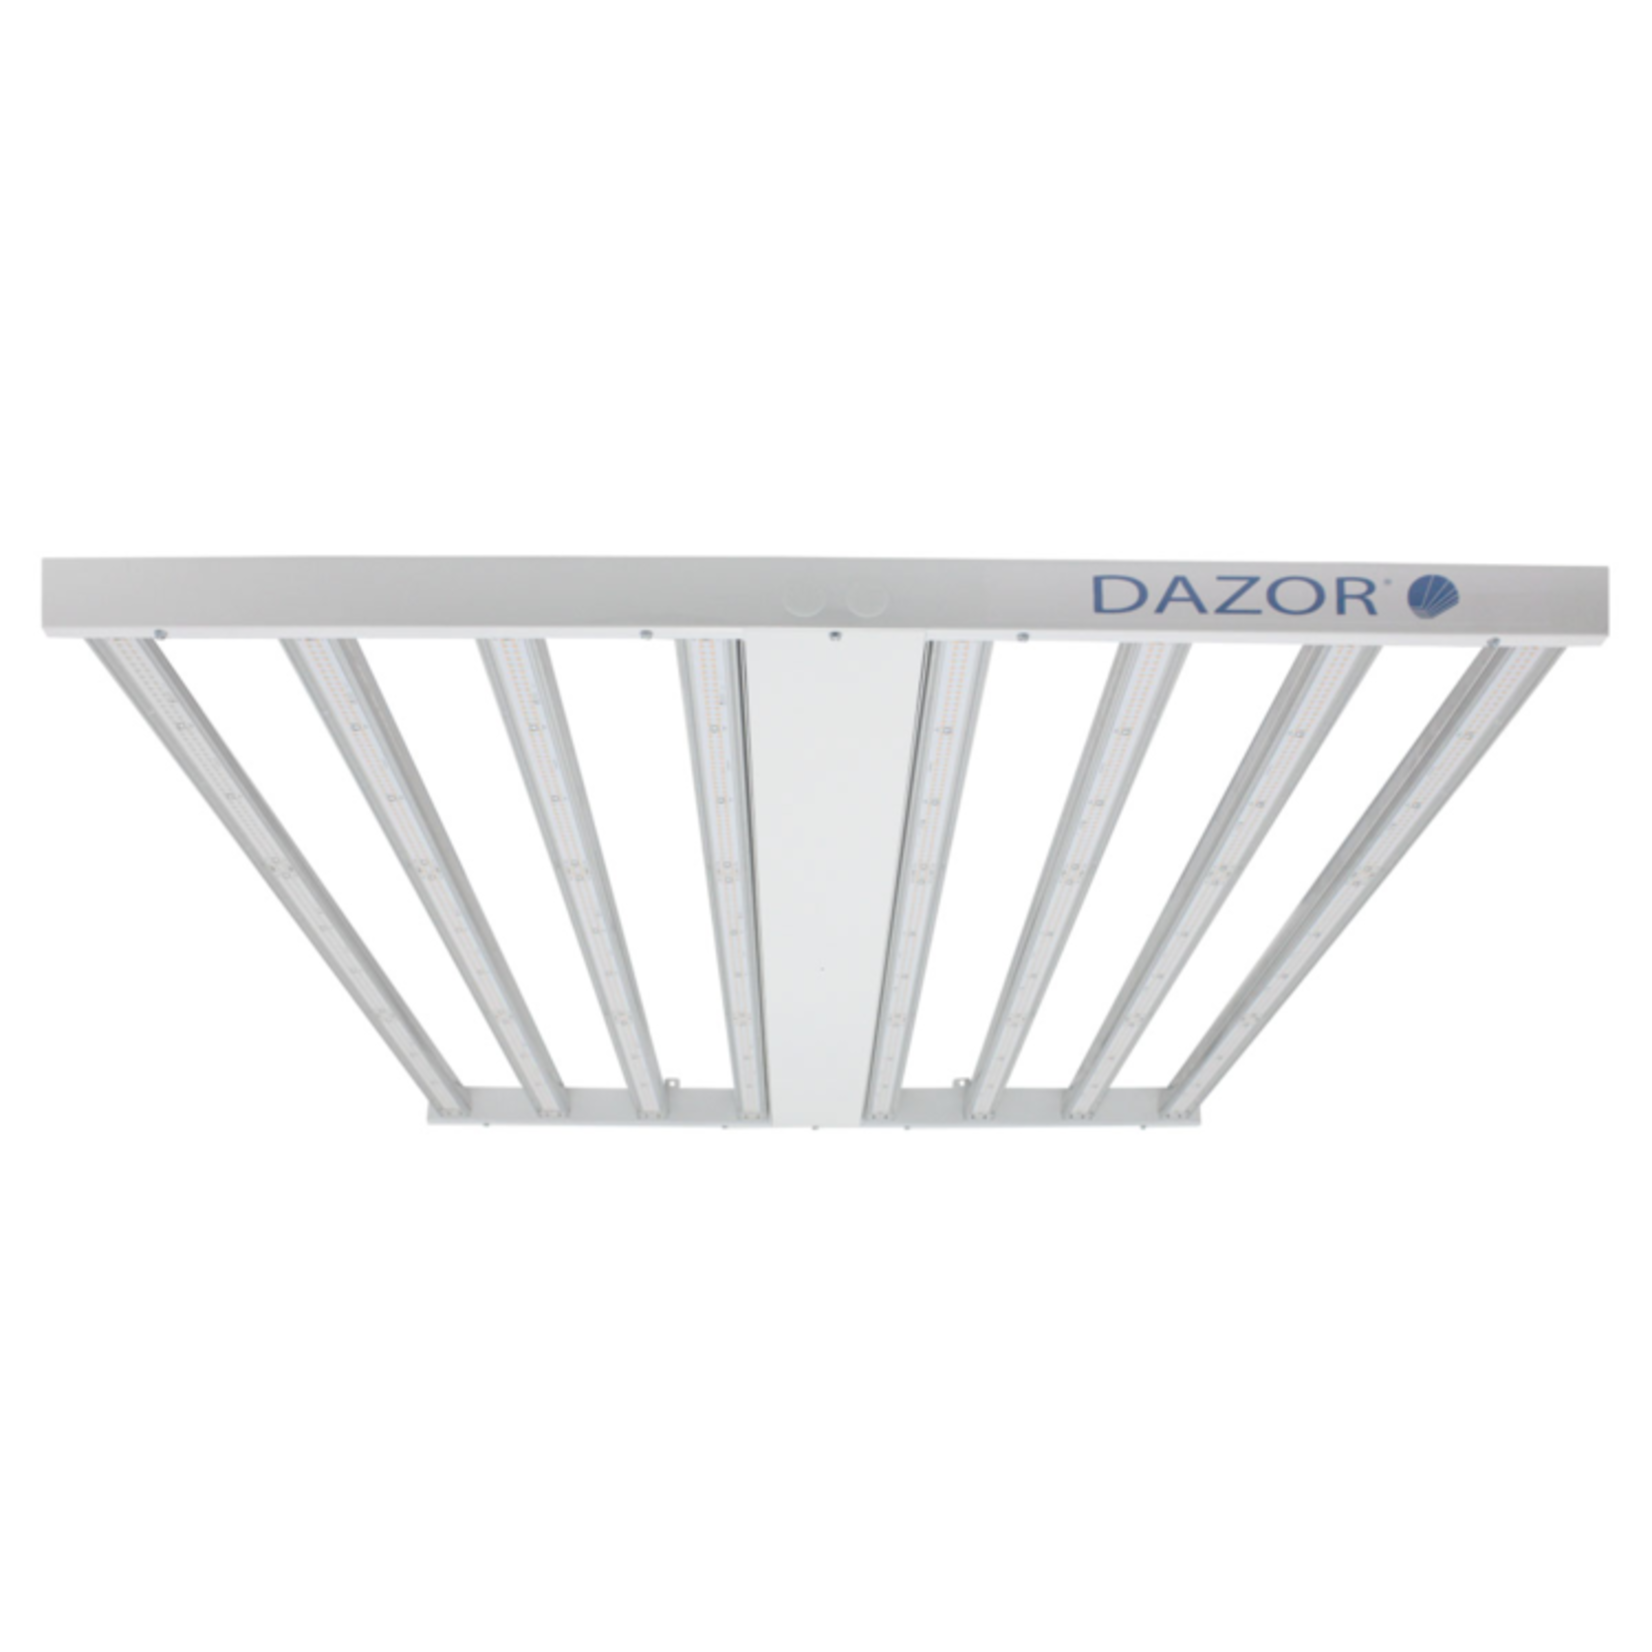 Dazor PARMax 8 LED Grow light 660W with power cord